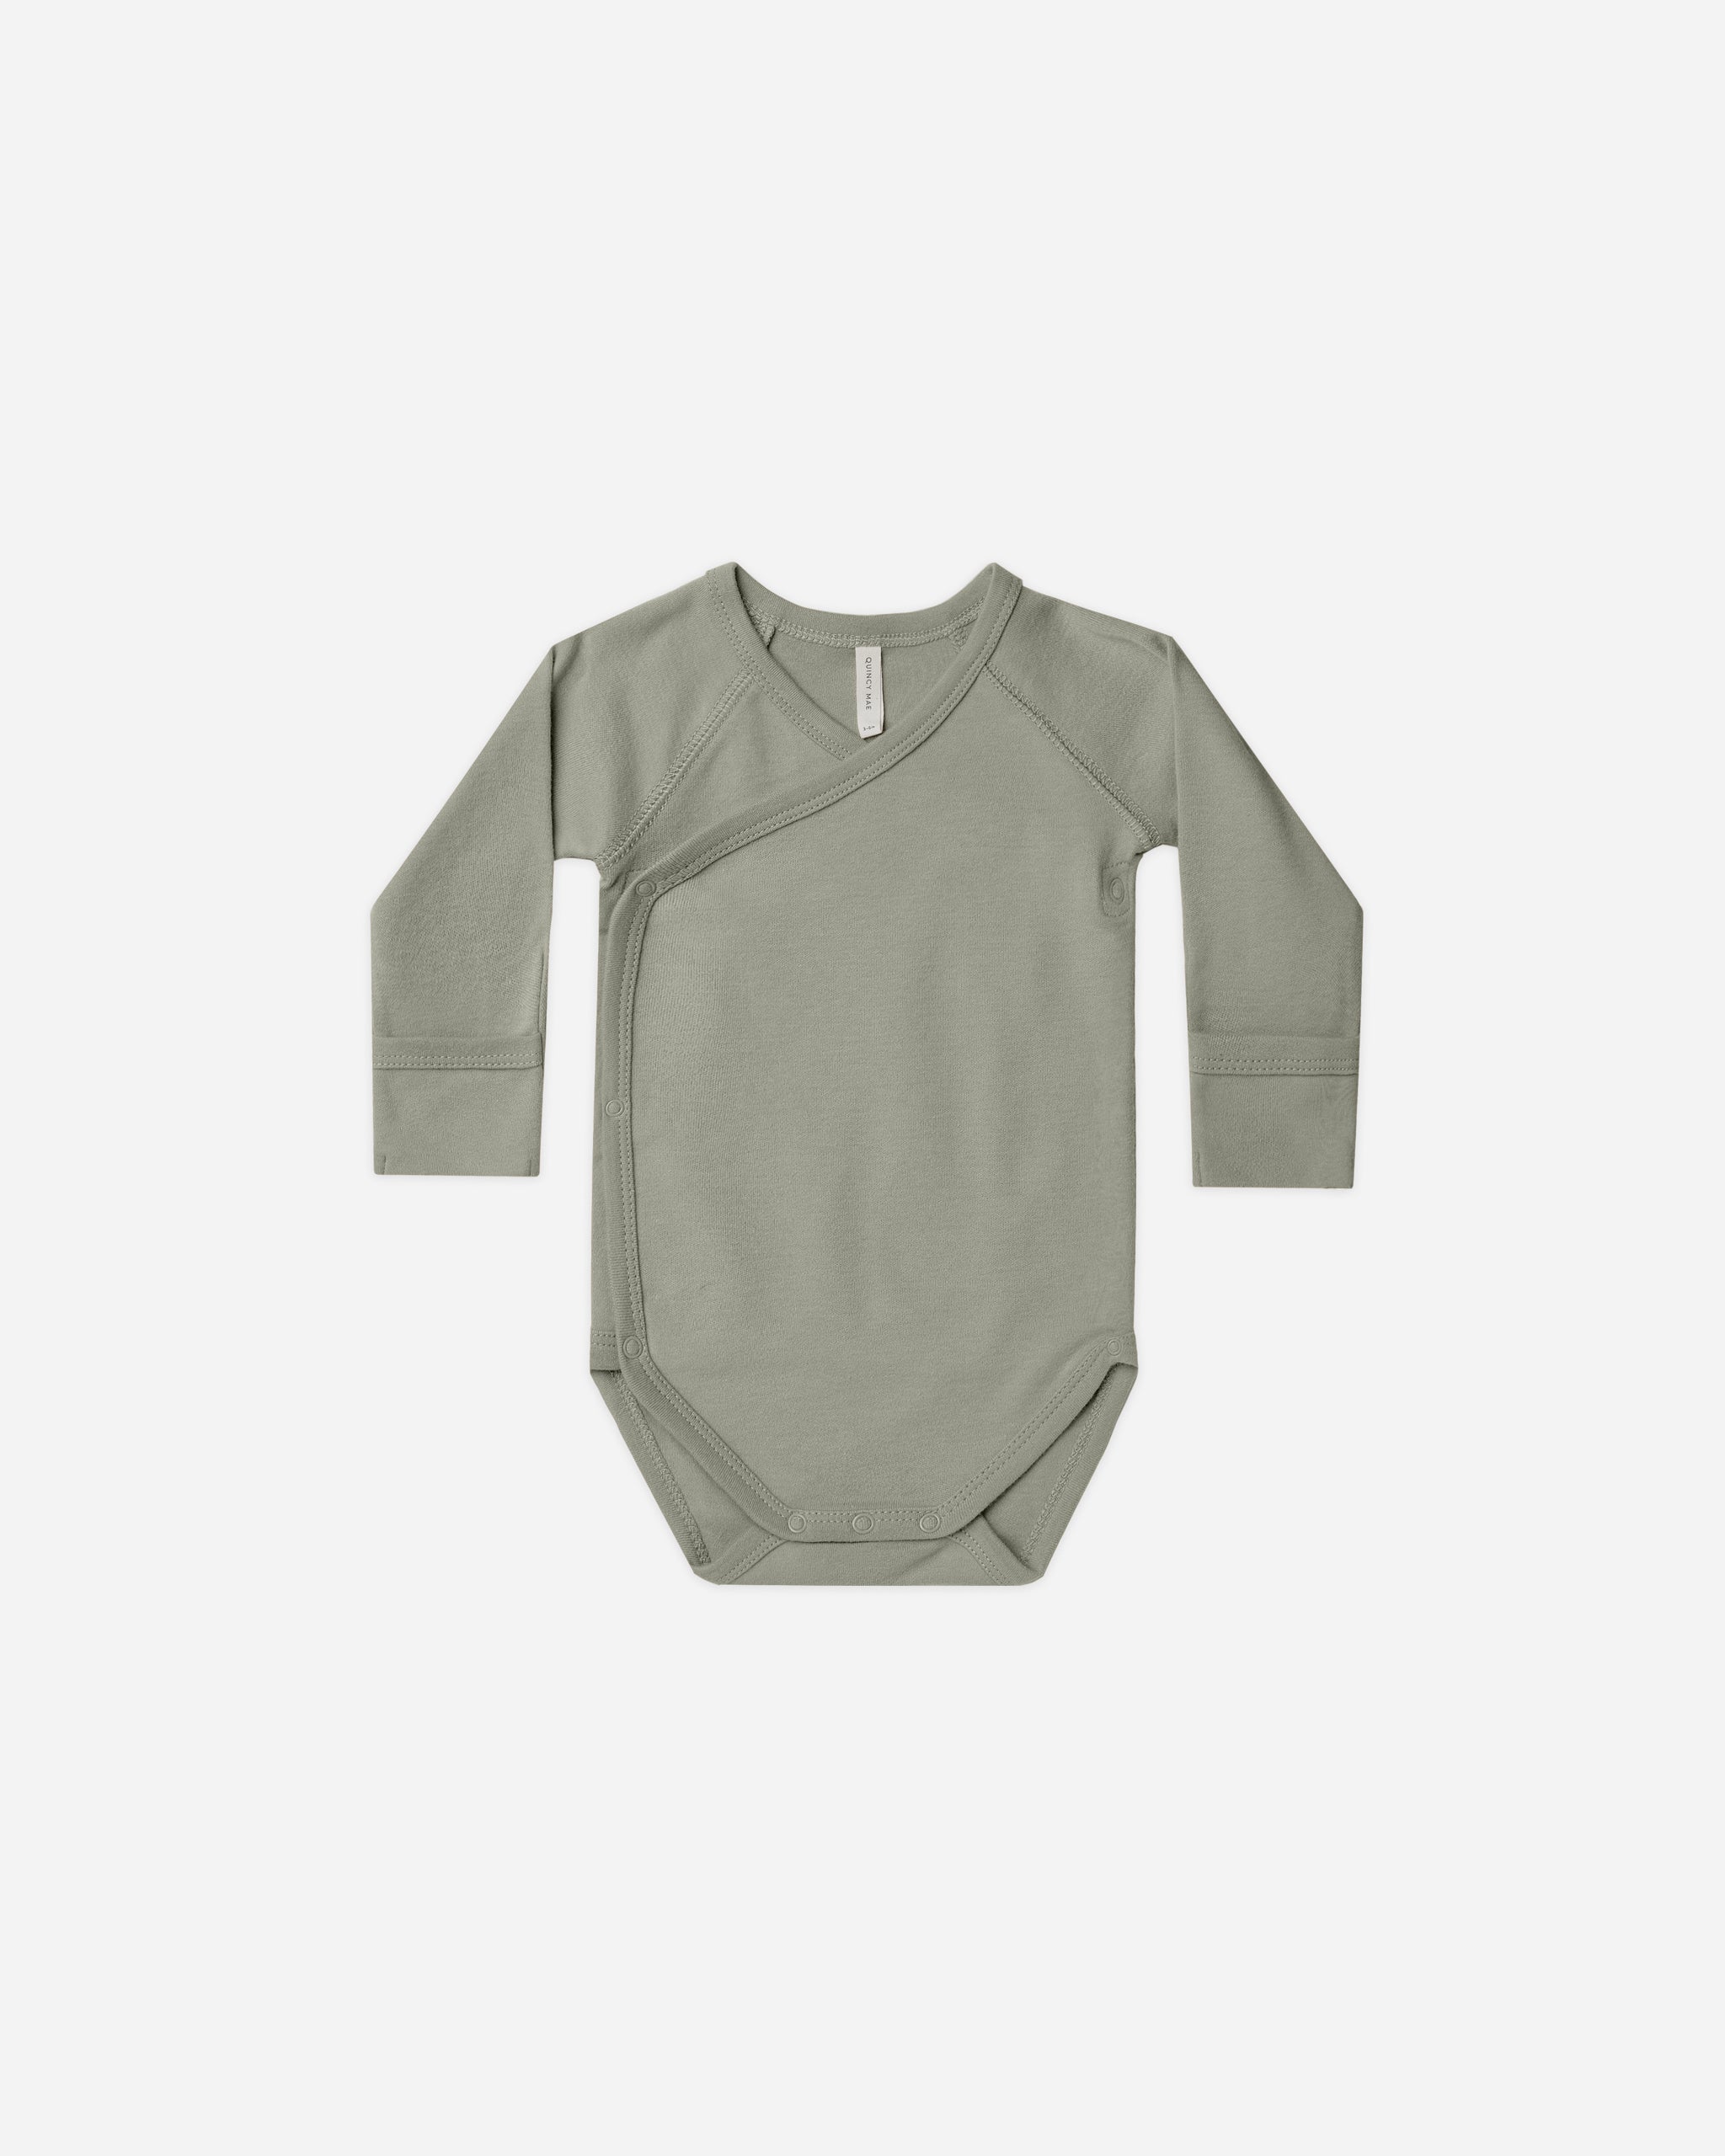 Side-Snap Bodysuit || Basil - Rylee + Cru | Kids Clothes | Trendy Baby Clothes | Modern Infant Outfits |